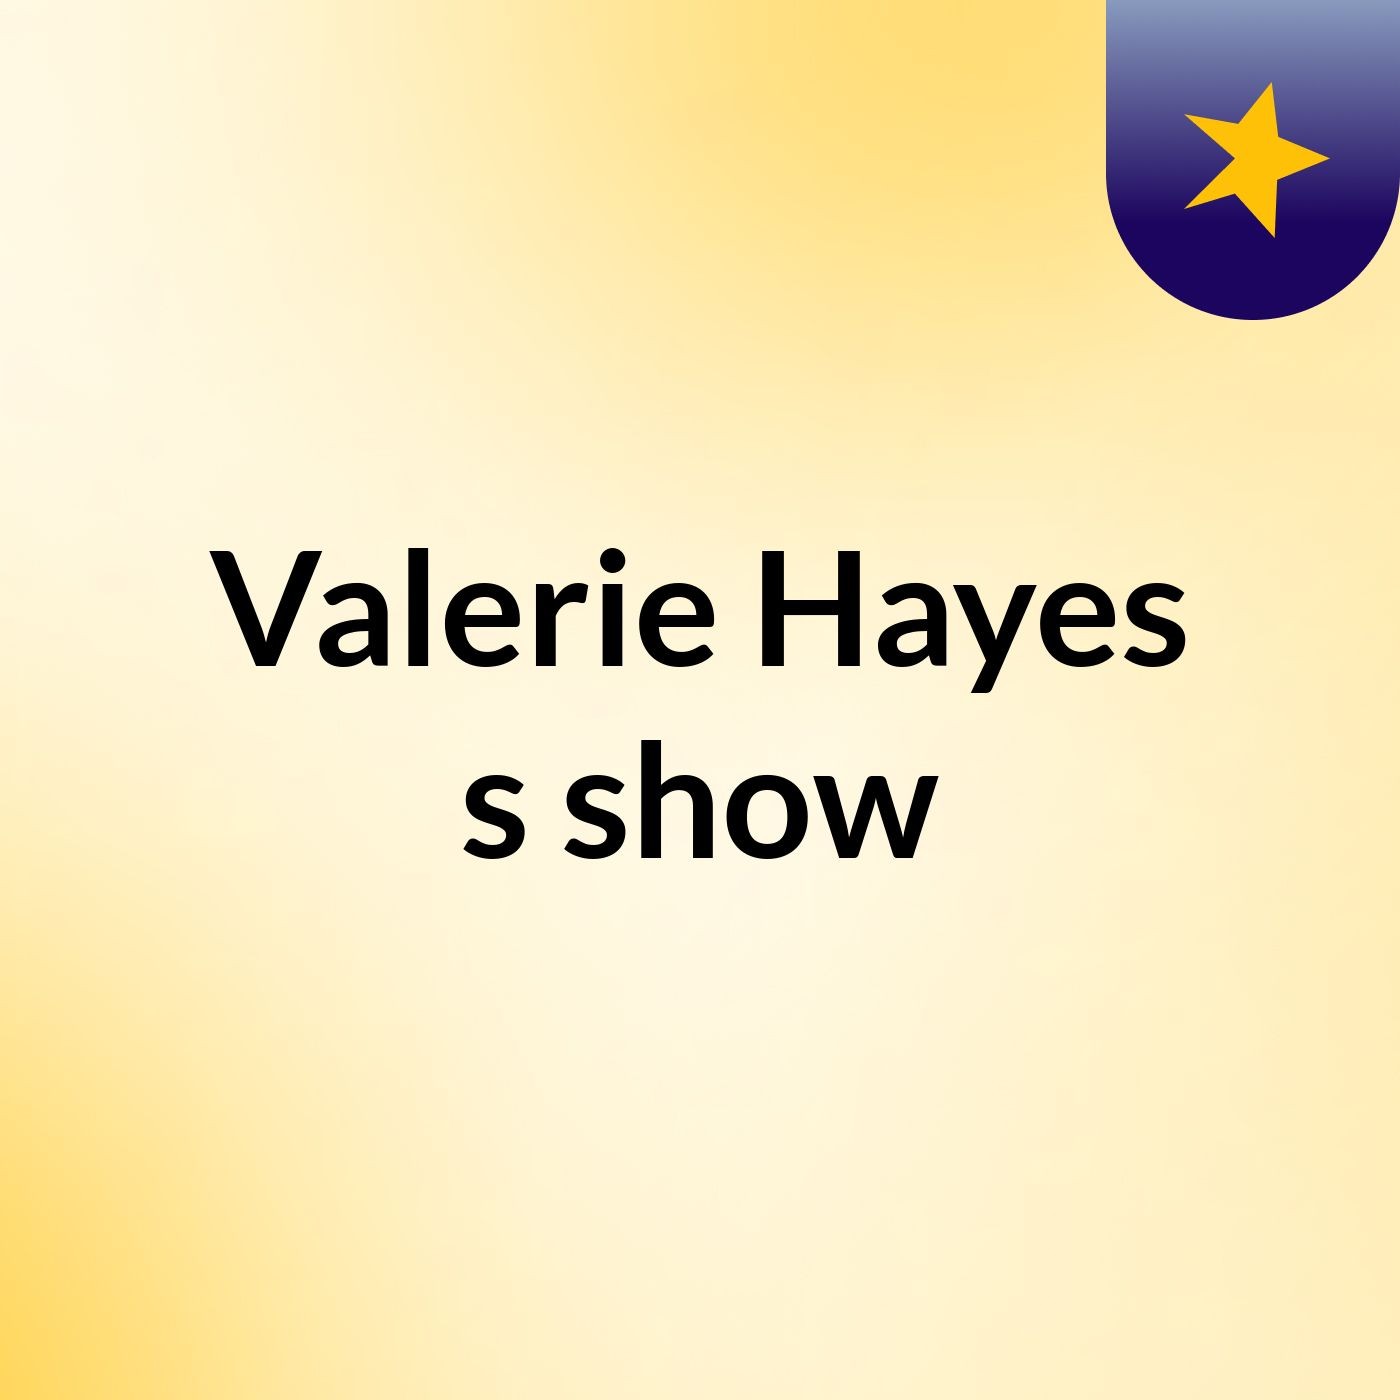 Valerie Hayes's show